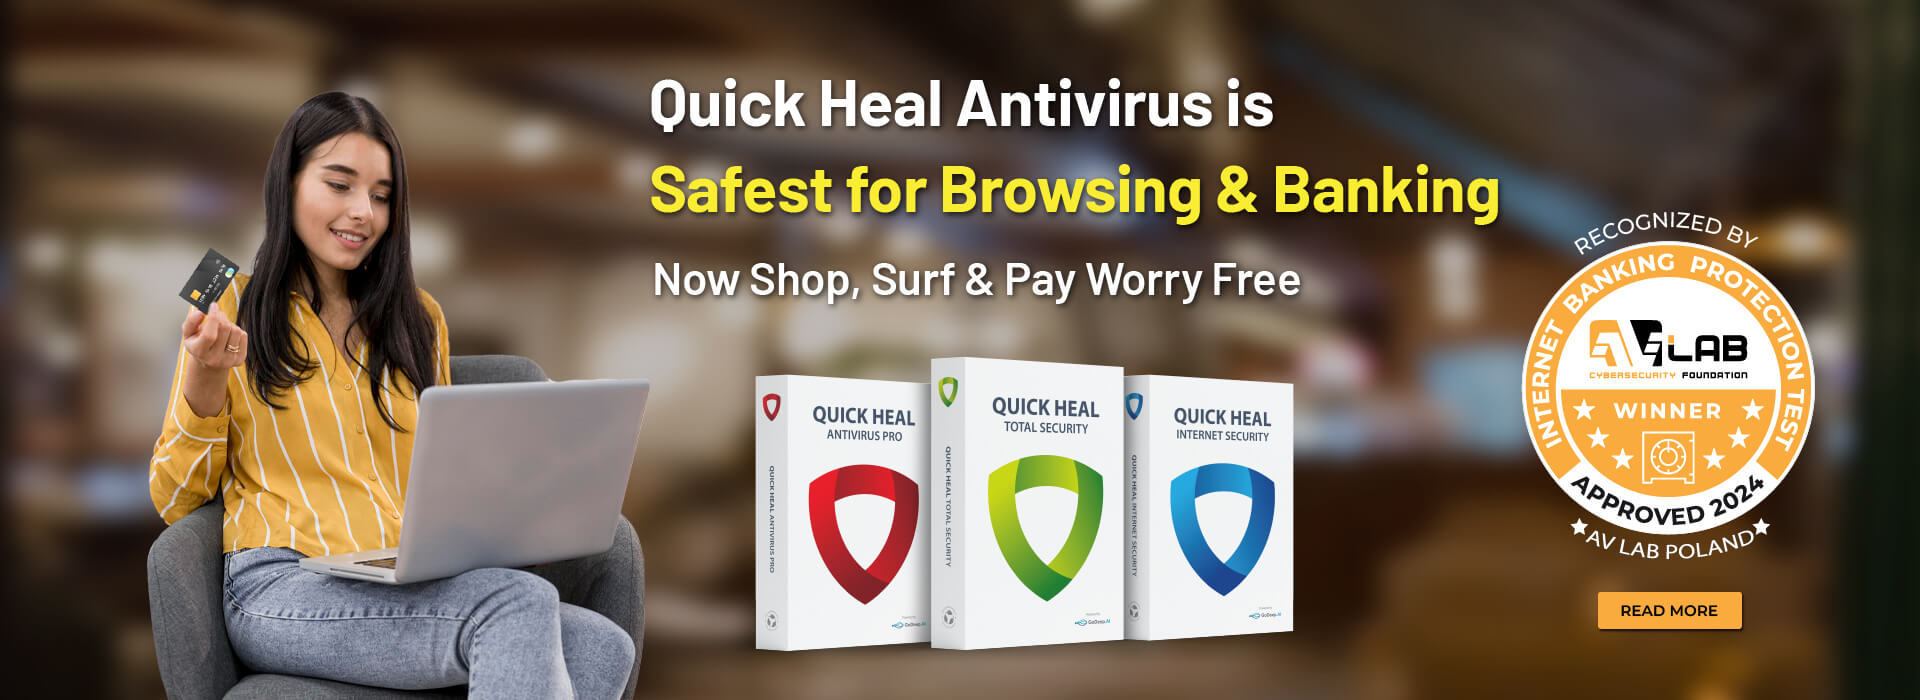 Quick Heal Anitvirus is safest for browsing & banking